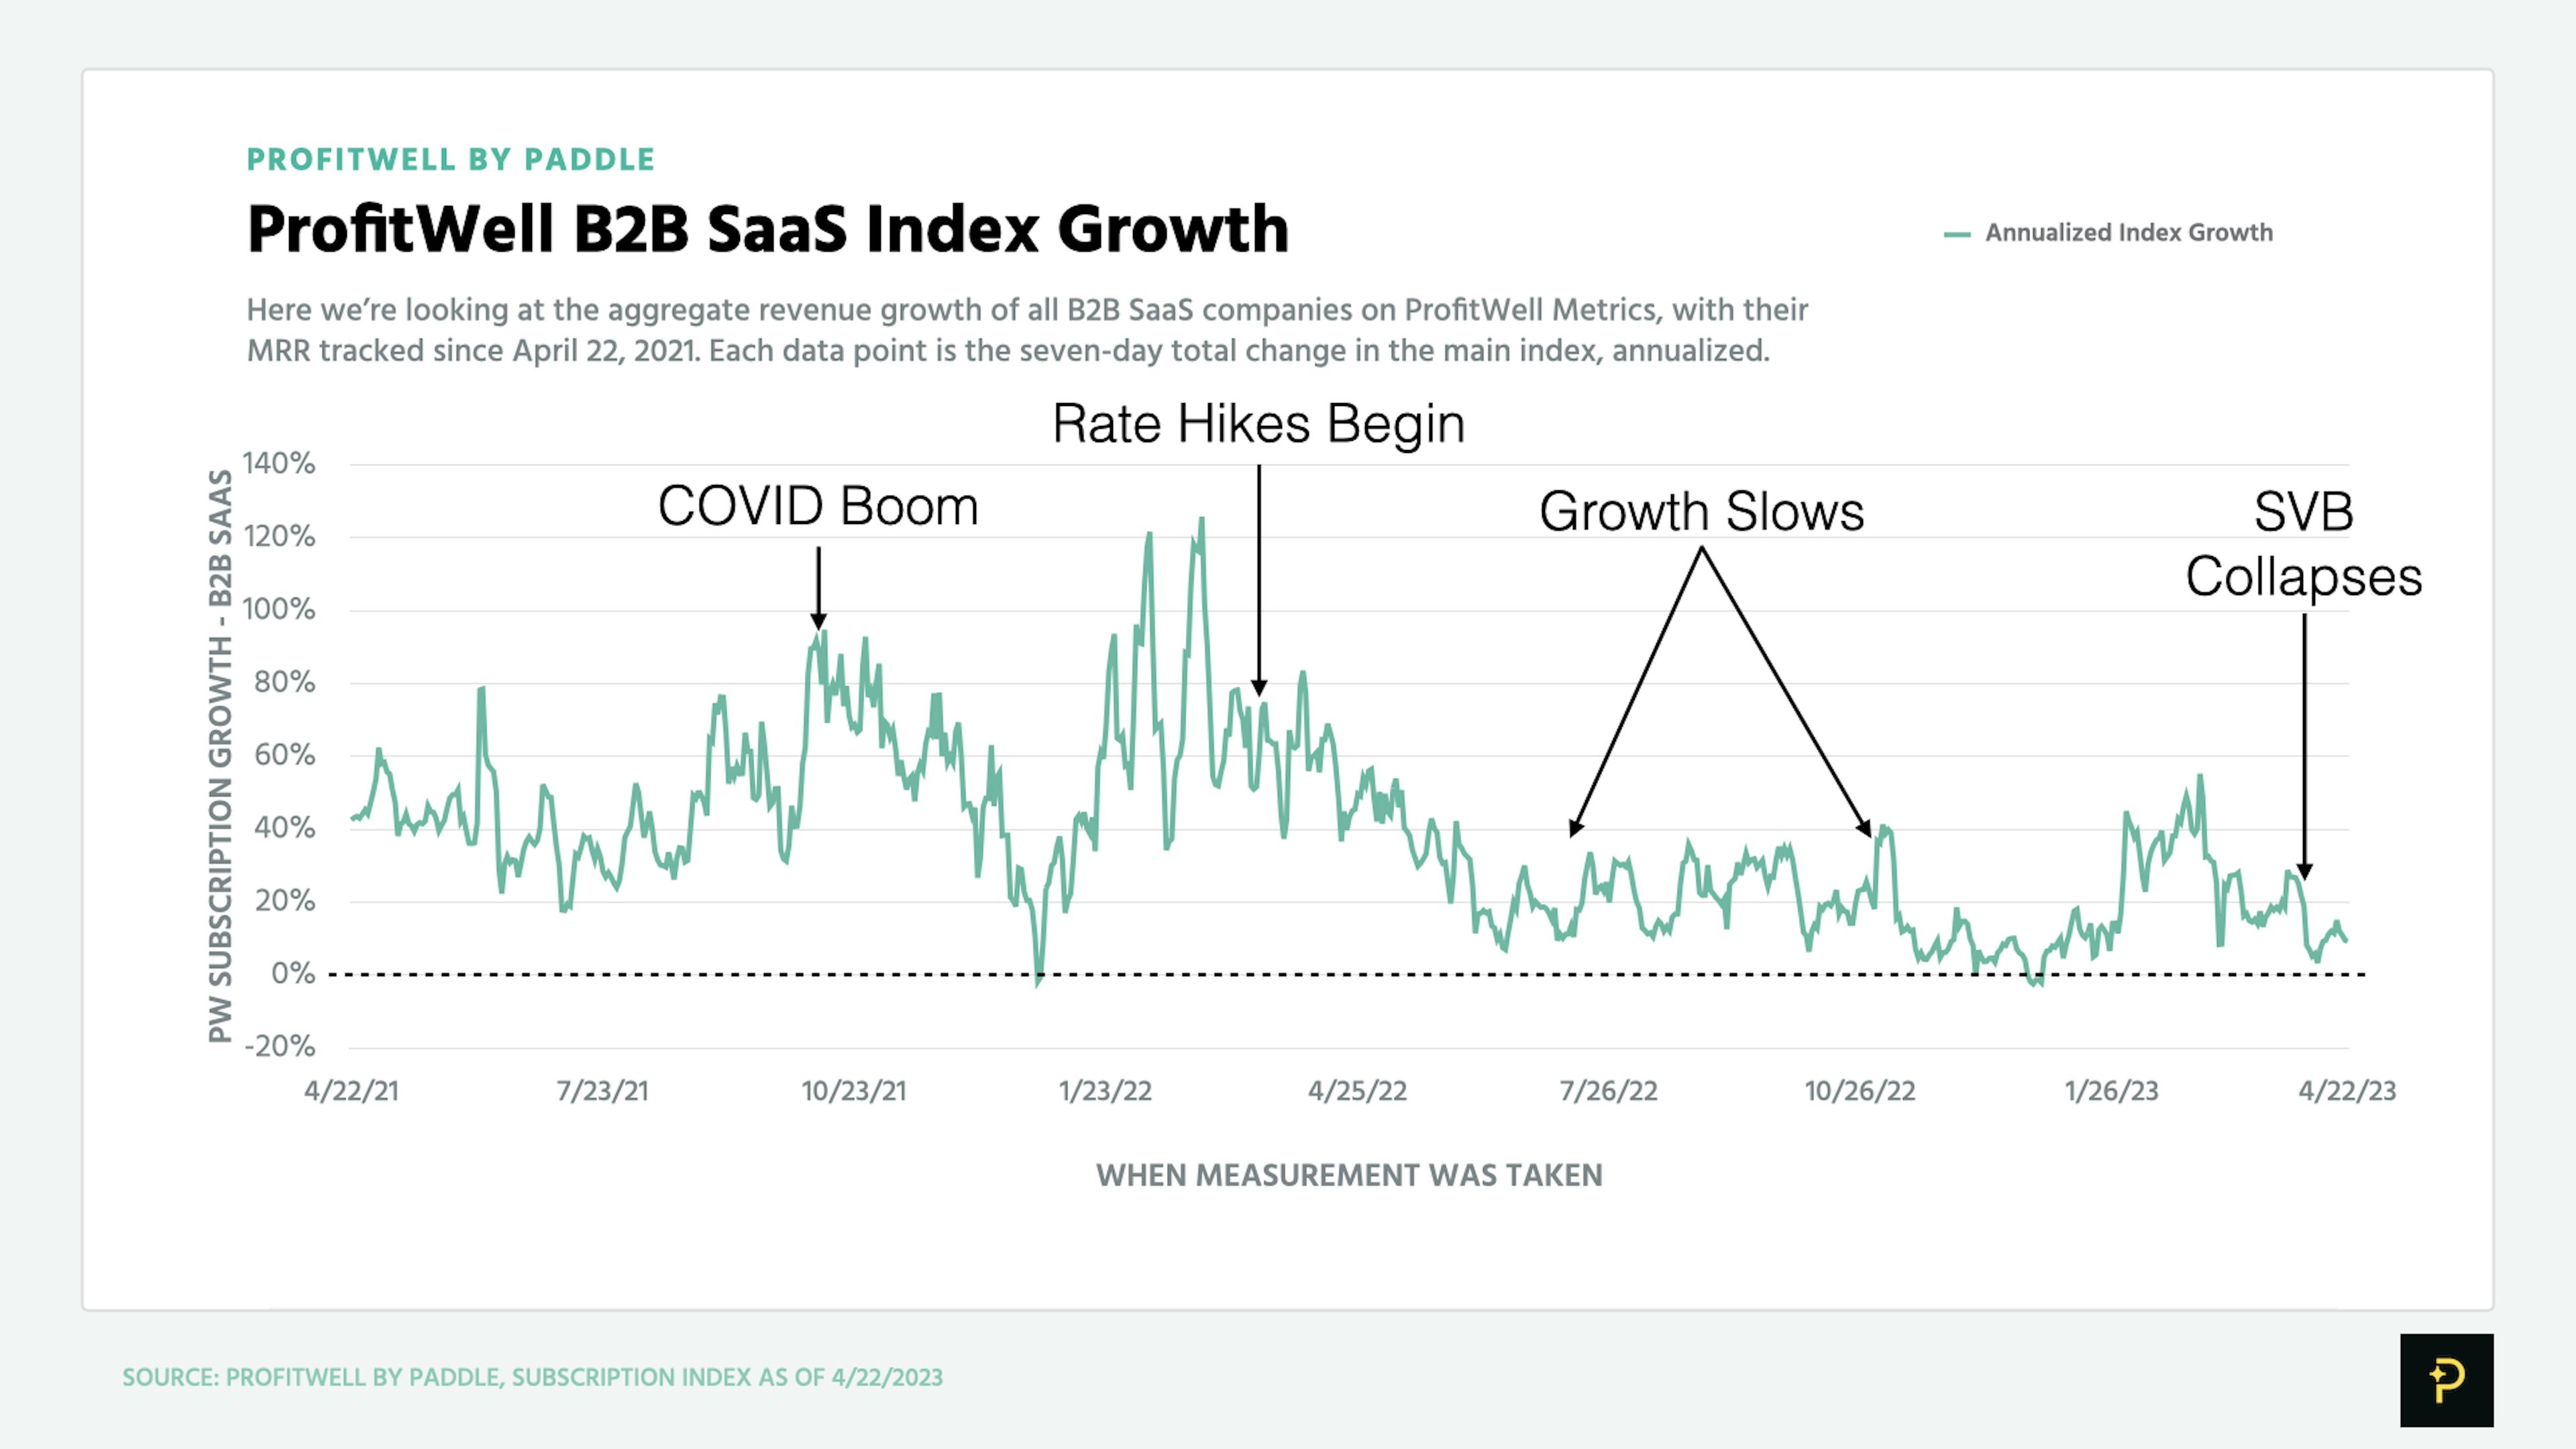 Chart of the ProfitWell B2B SaaS Index's Growth in annualized terms, showing a slowdown in growth after interest rate hikes began, and a pronounced dip after the collapse of Silicon Valley Bank.